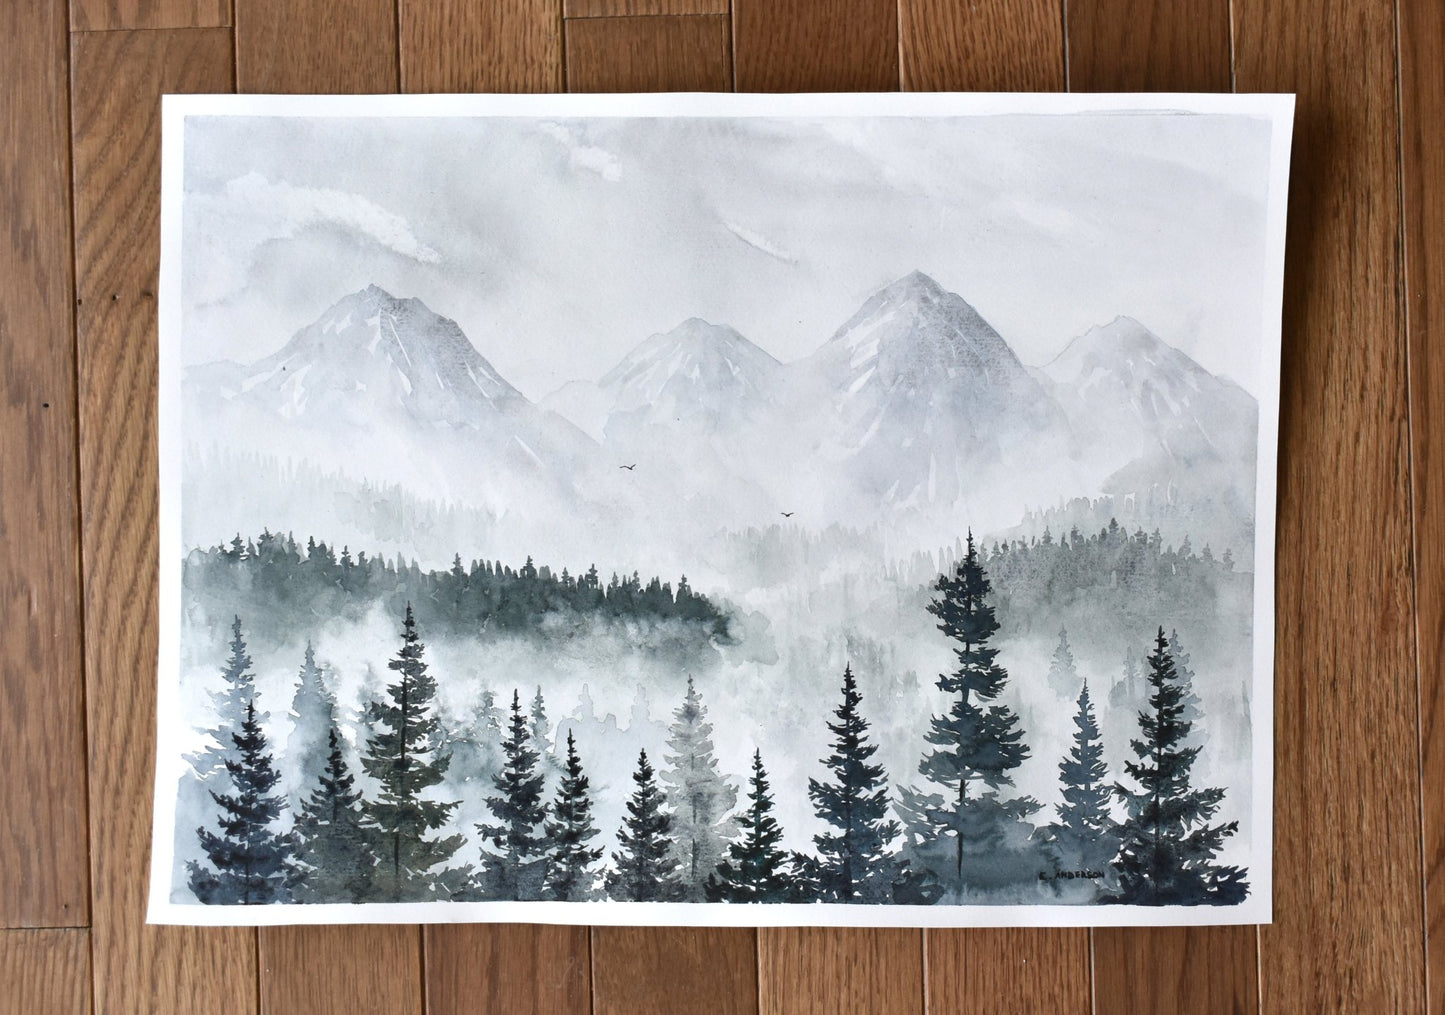 ORIGINAL watercolor painting of foggy forest and mountains, Forest painting 11 x 15 inches, Black and white painting, Eliza Anderson Art - Eliza Anderson ArtEliza Anderson Art